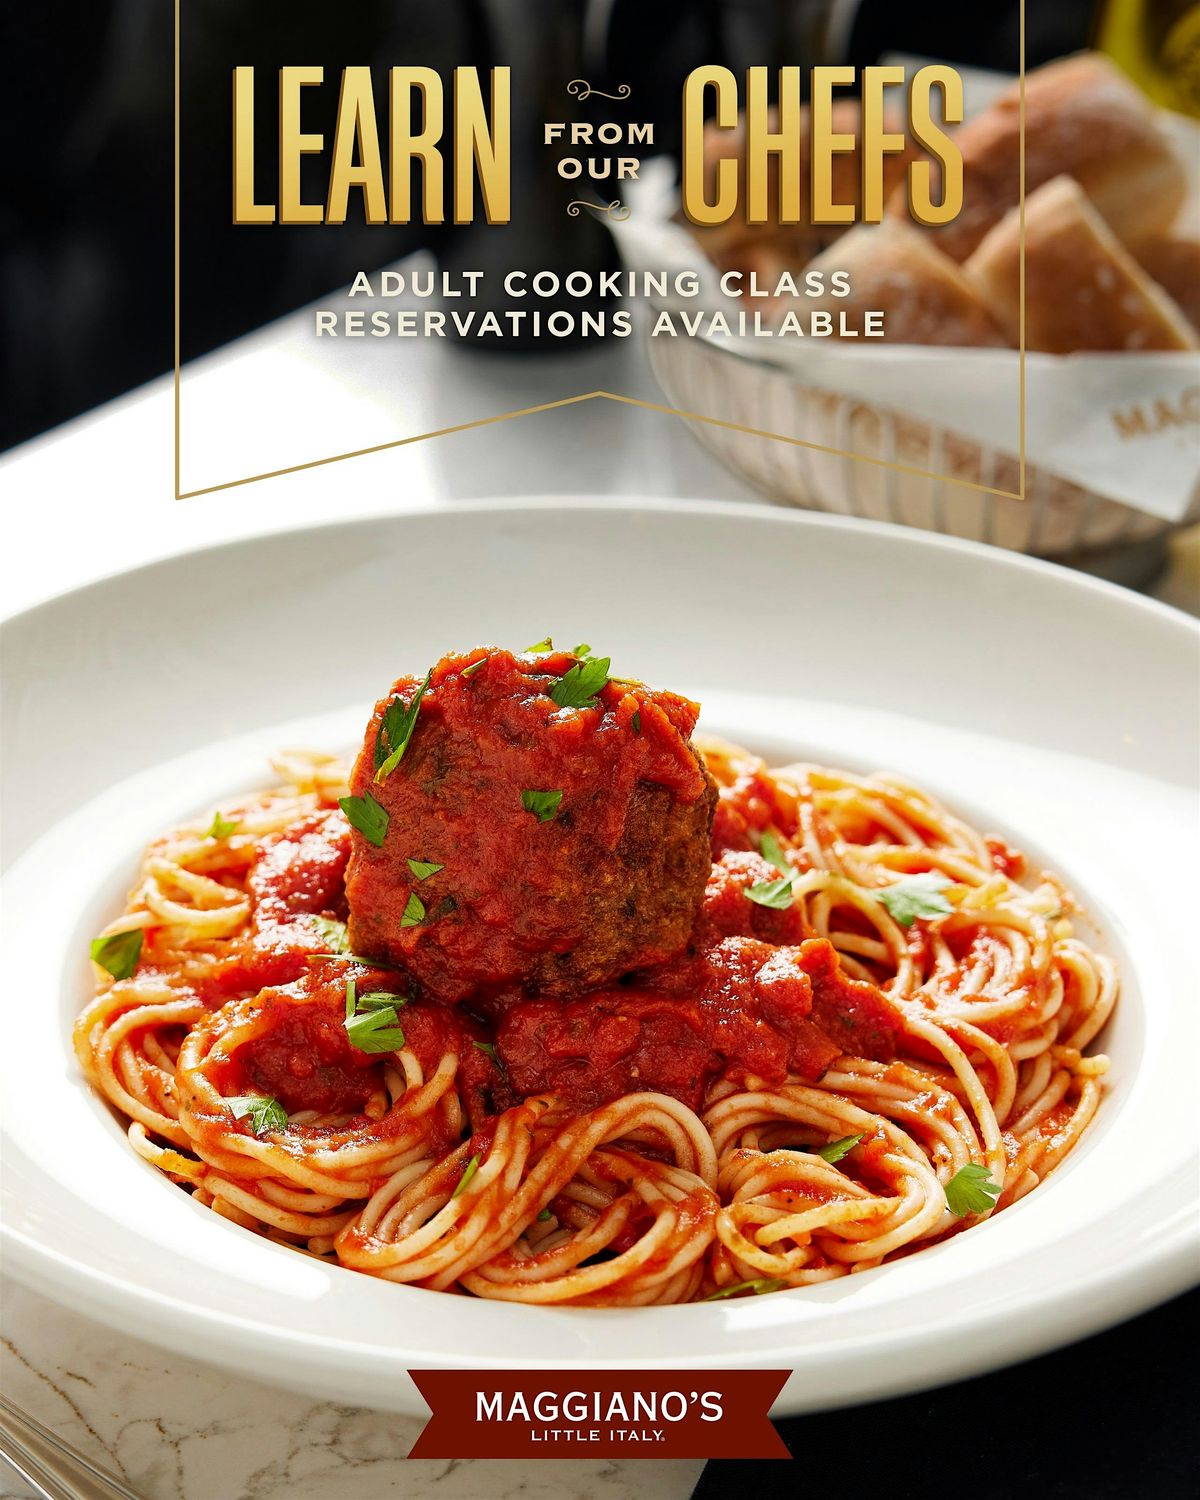 Maggiano's Fall Adult Cooking Class